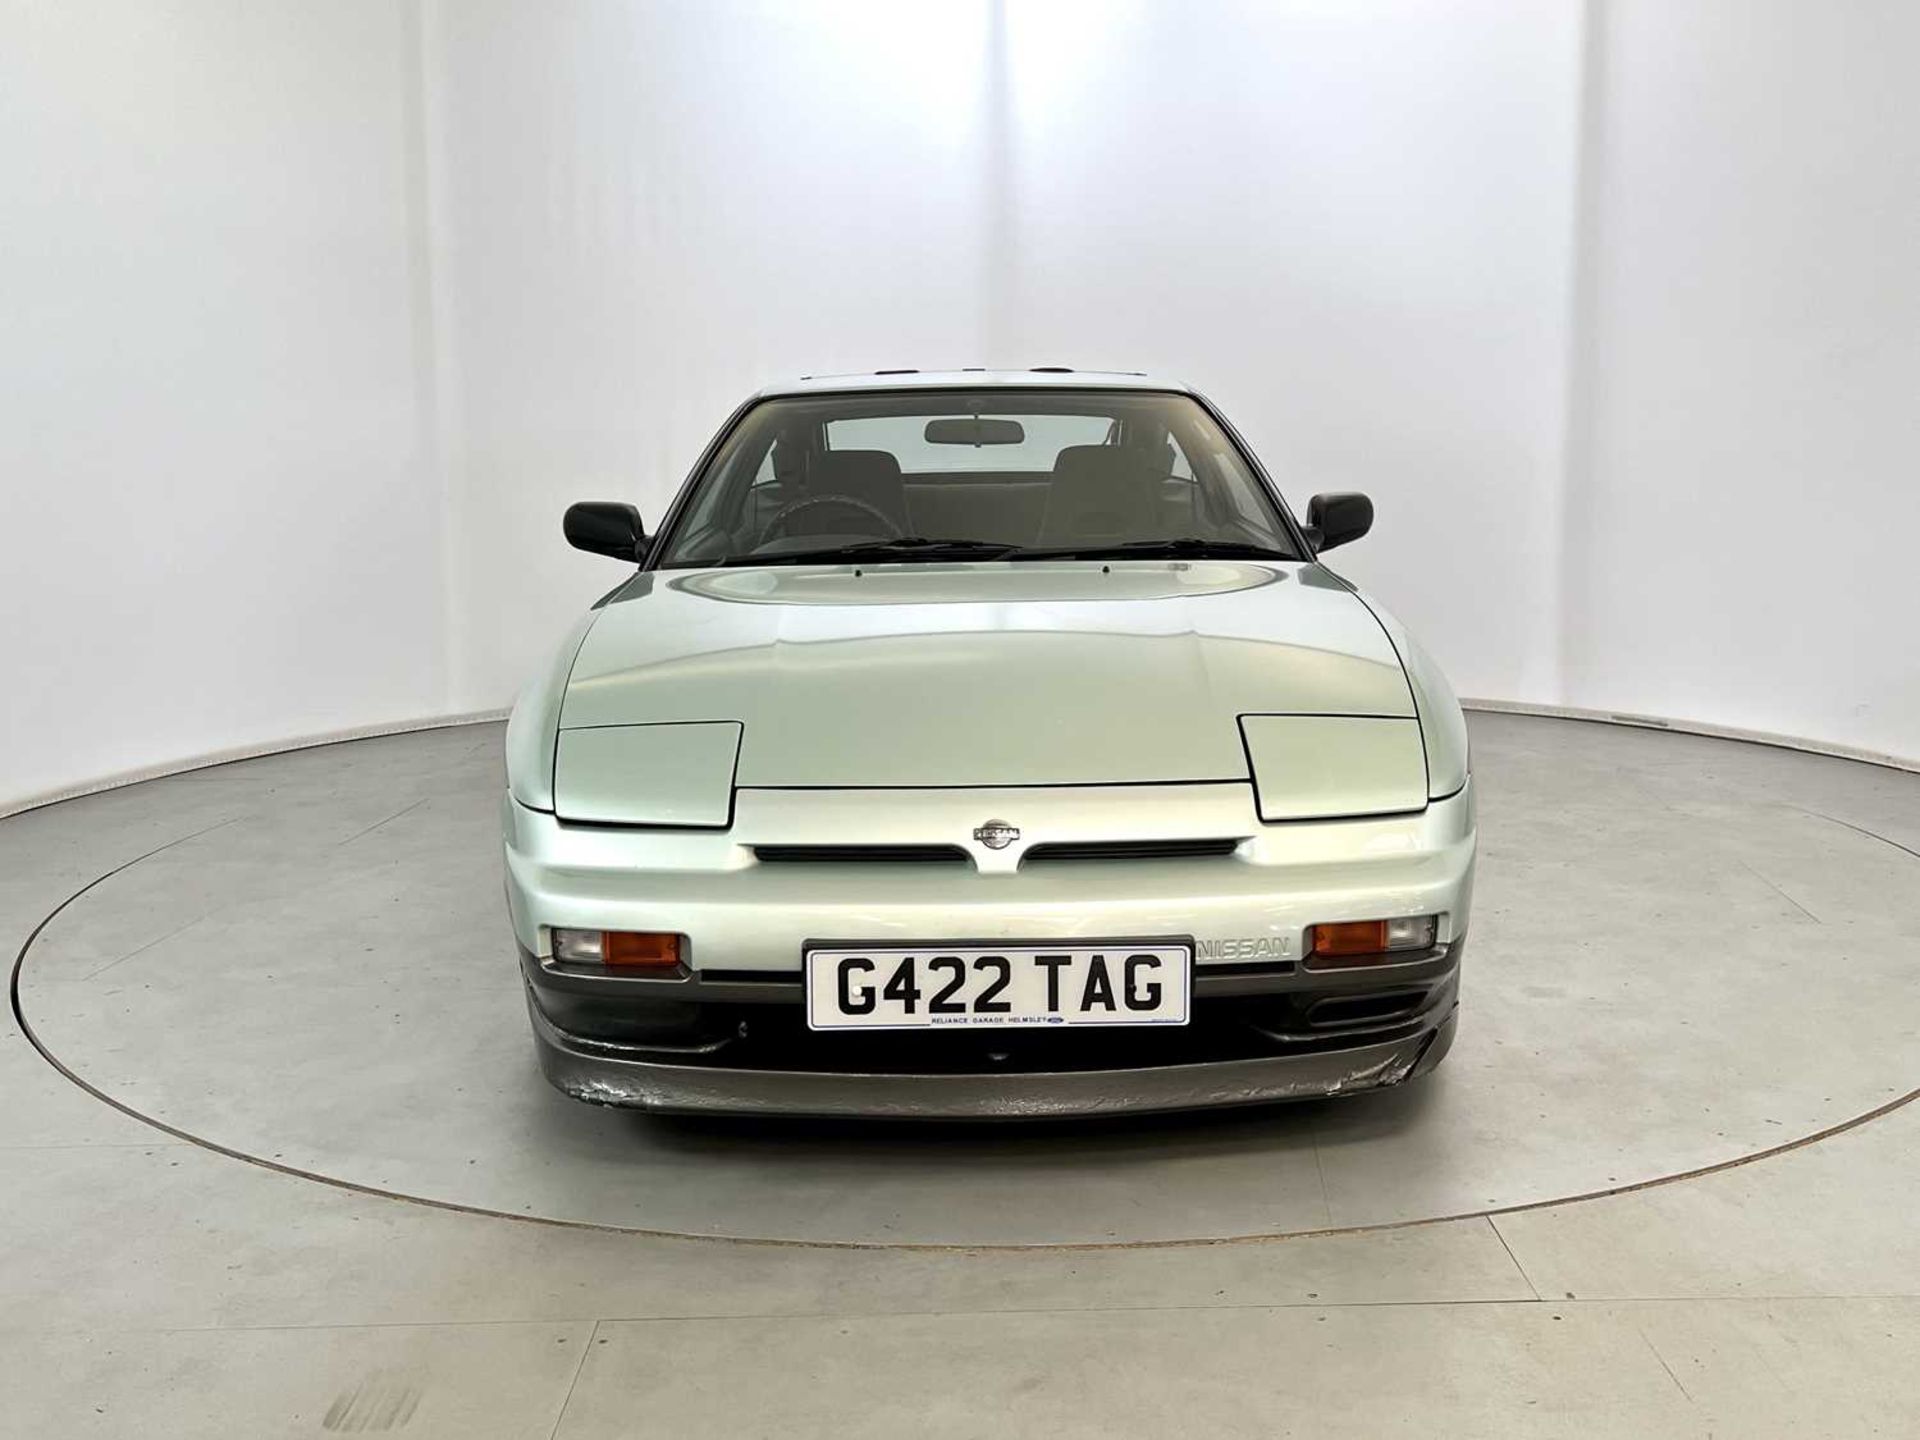 1990 Nissan 200SX - Image 2 of 30